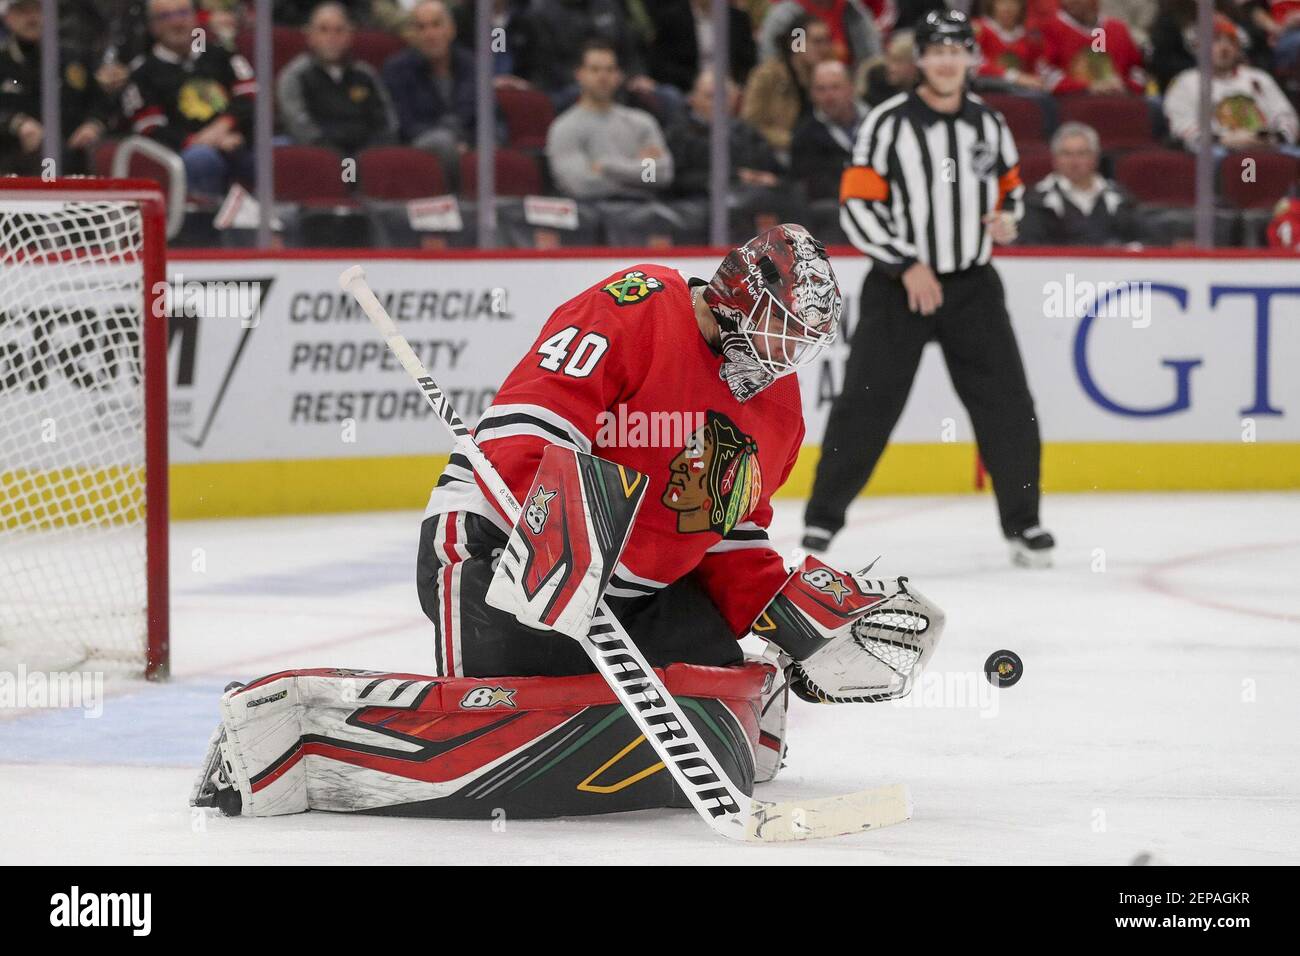 Blackhawks goaltender Robin Lehner makes a save during the second period against the Hurricanes. (Photo by Armando L. Sanchez / Chicago Tribune/TNS/Sipa USA) Stock Photo